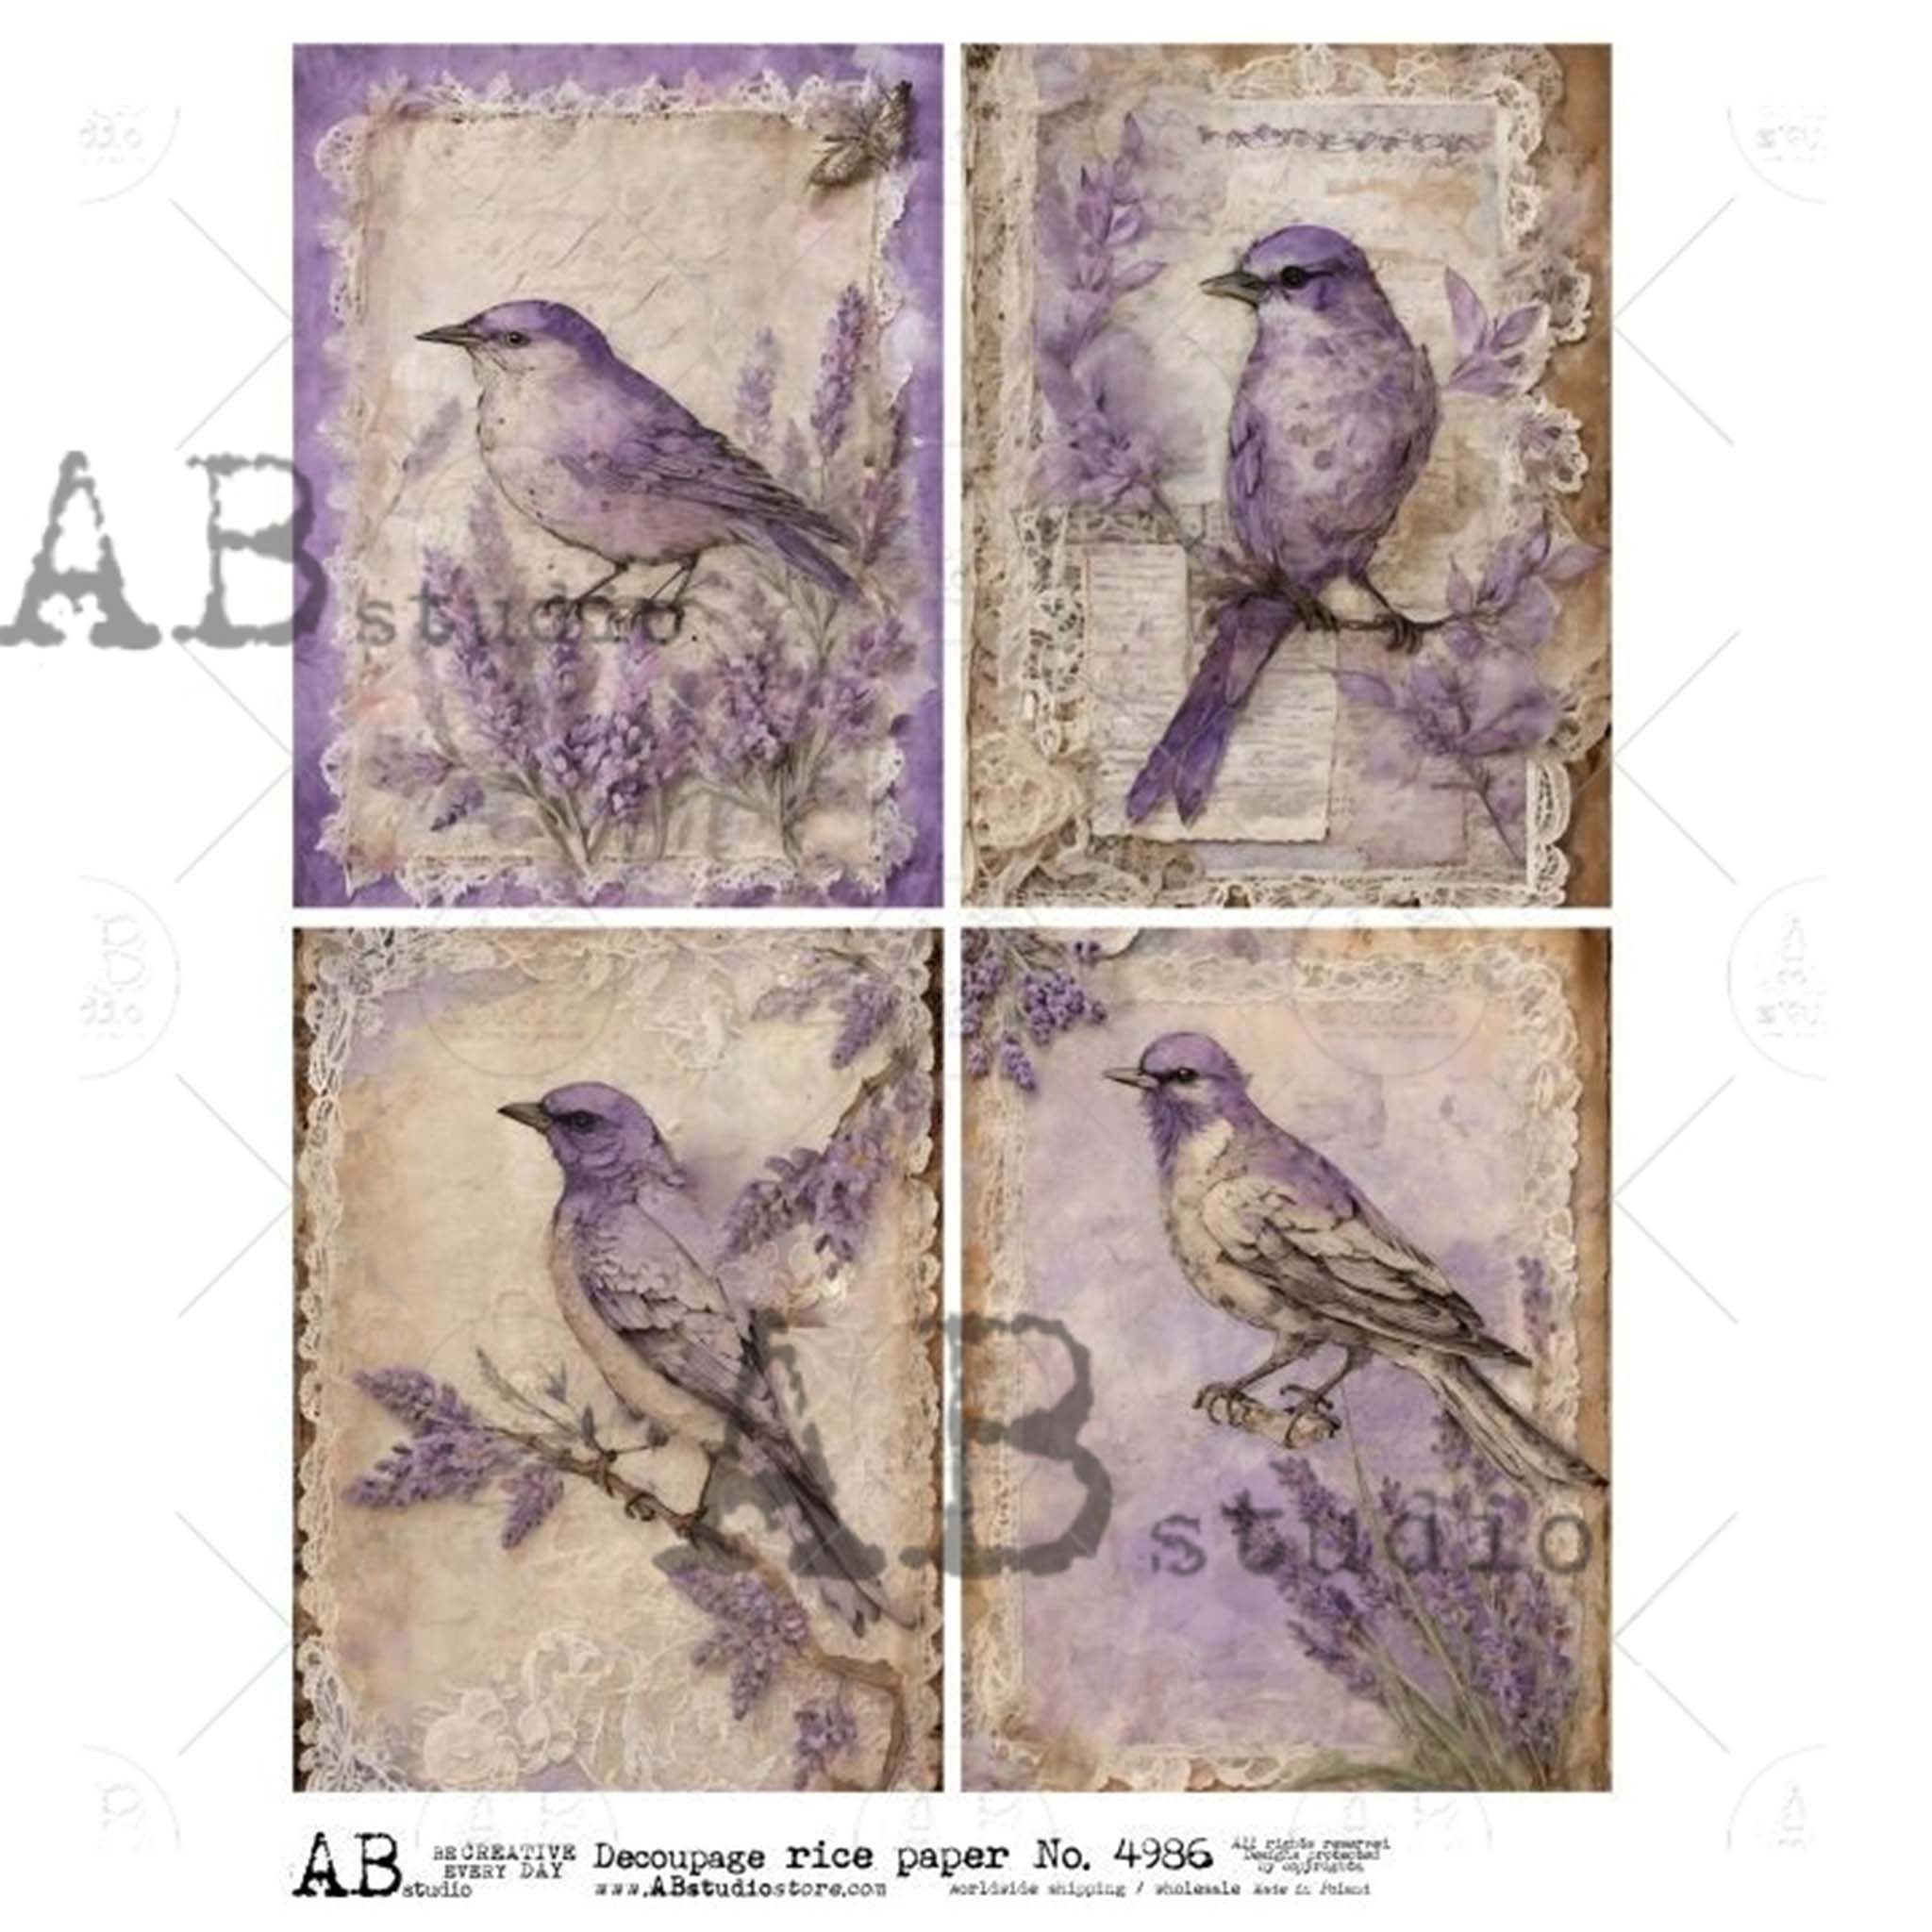 A4 rice paper design that features 4 designs of small birds with delicate lavender sprigs is against a white background.